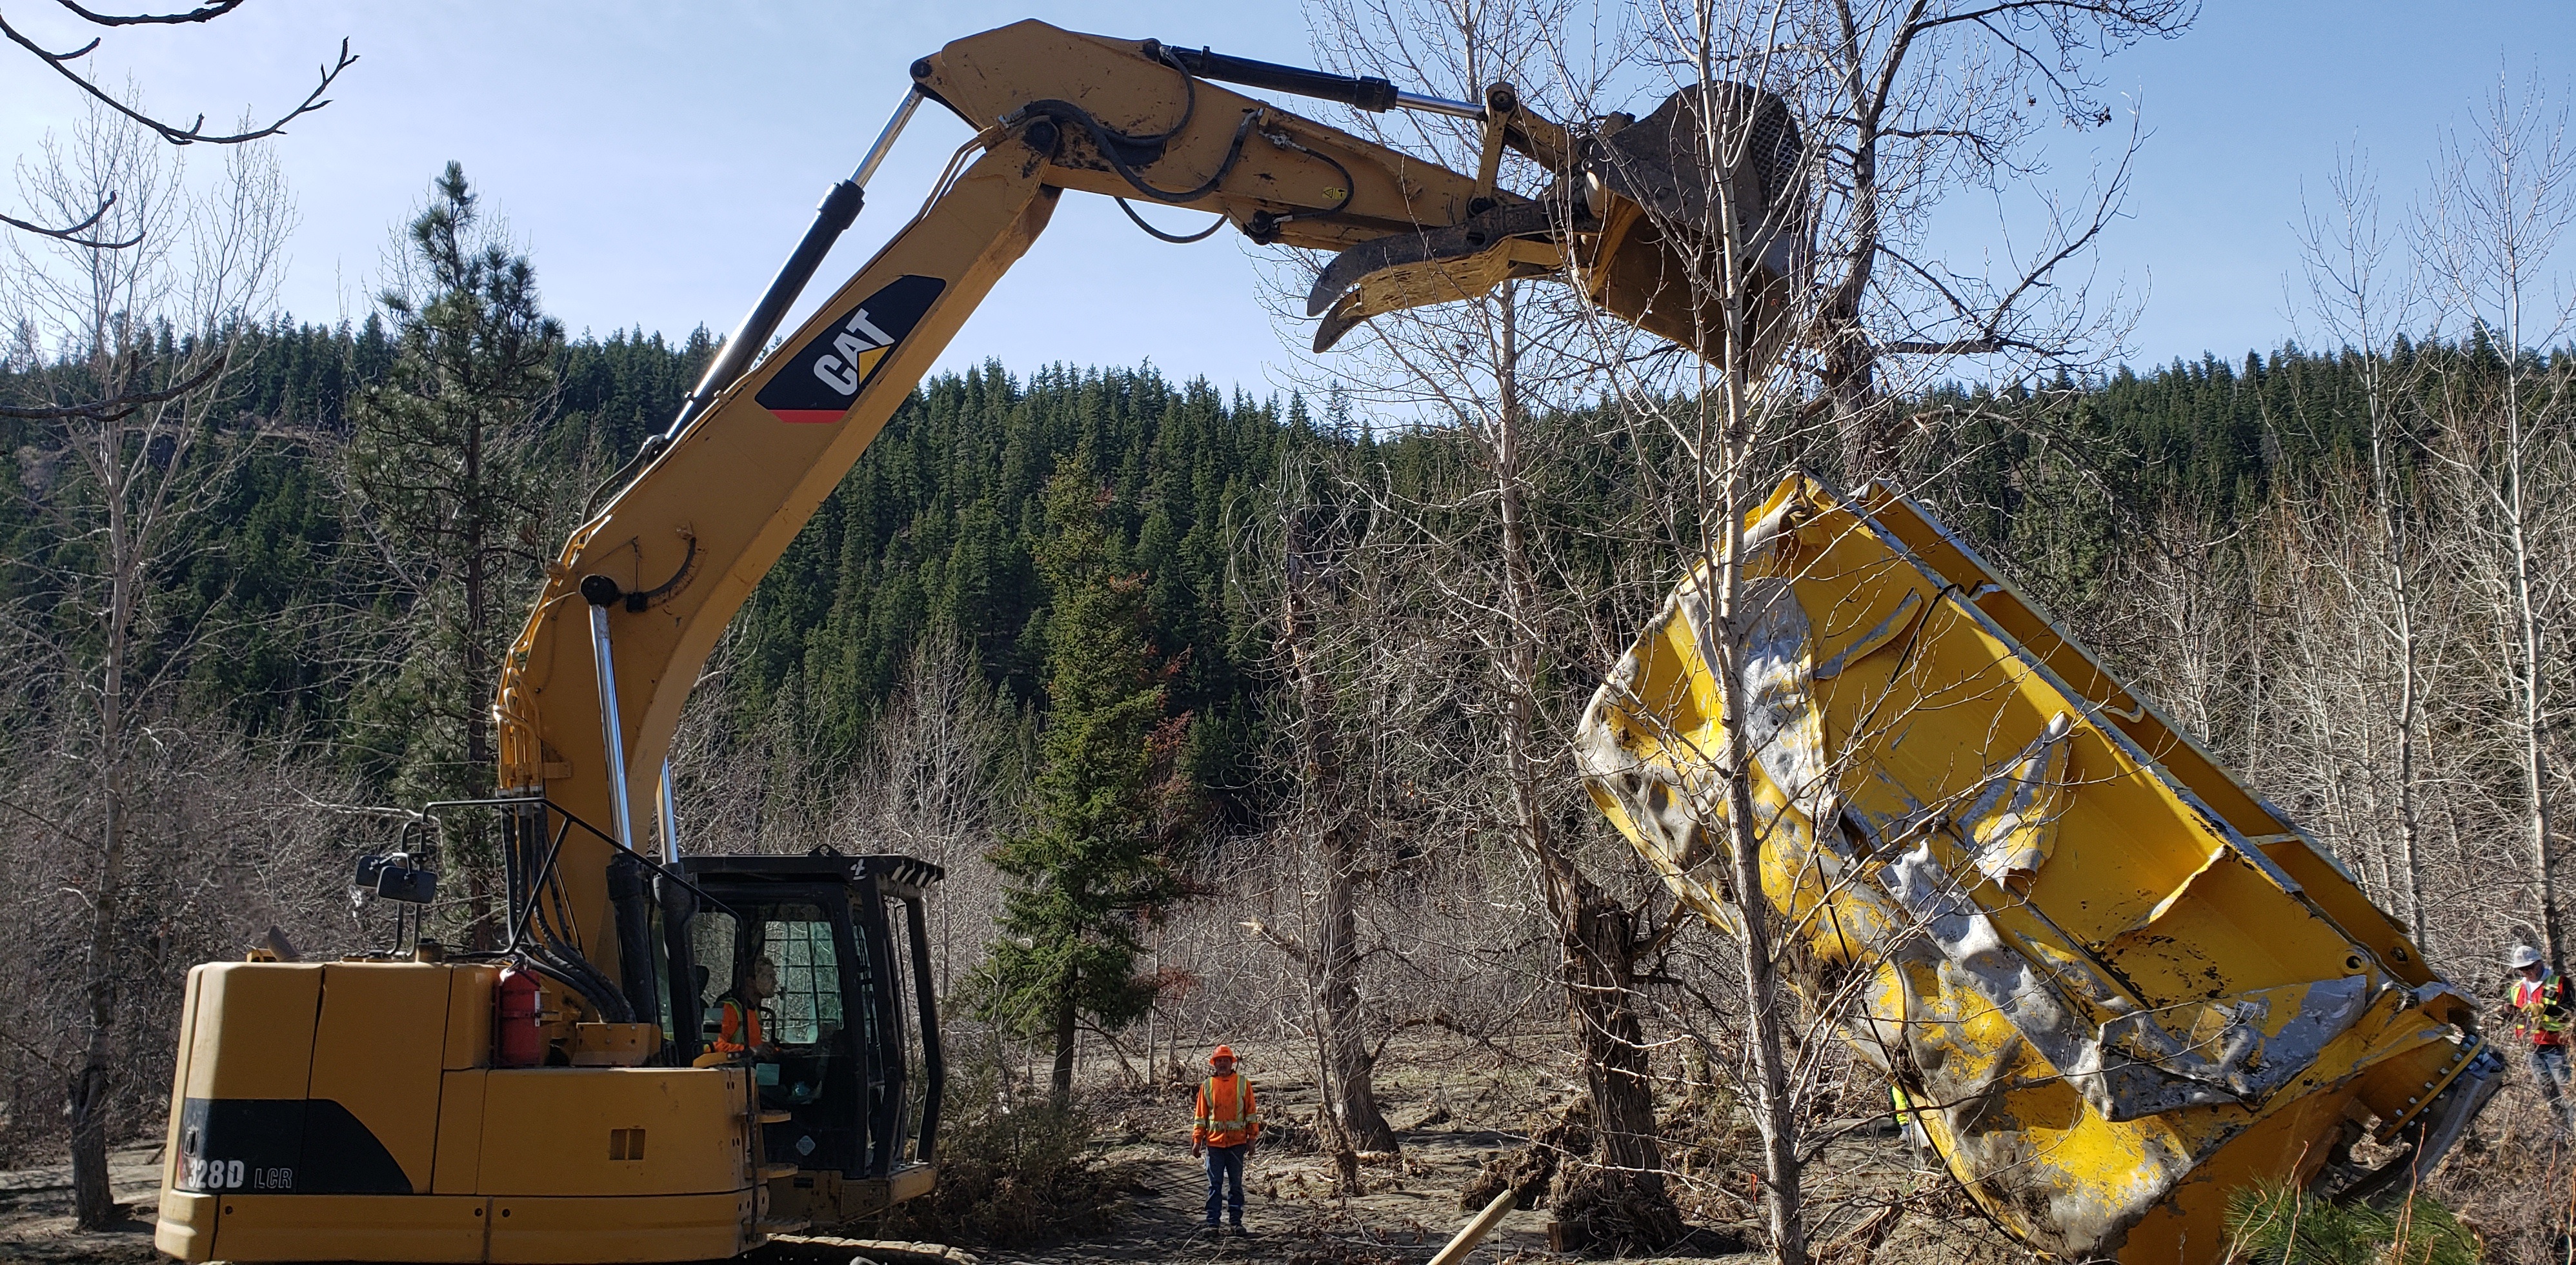 Excavator removing yellow container from Nicola River